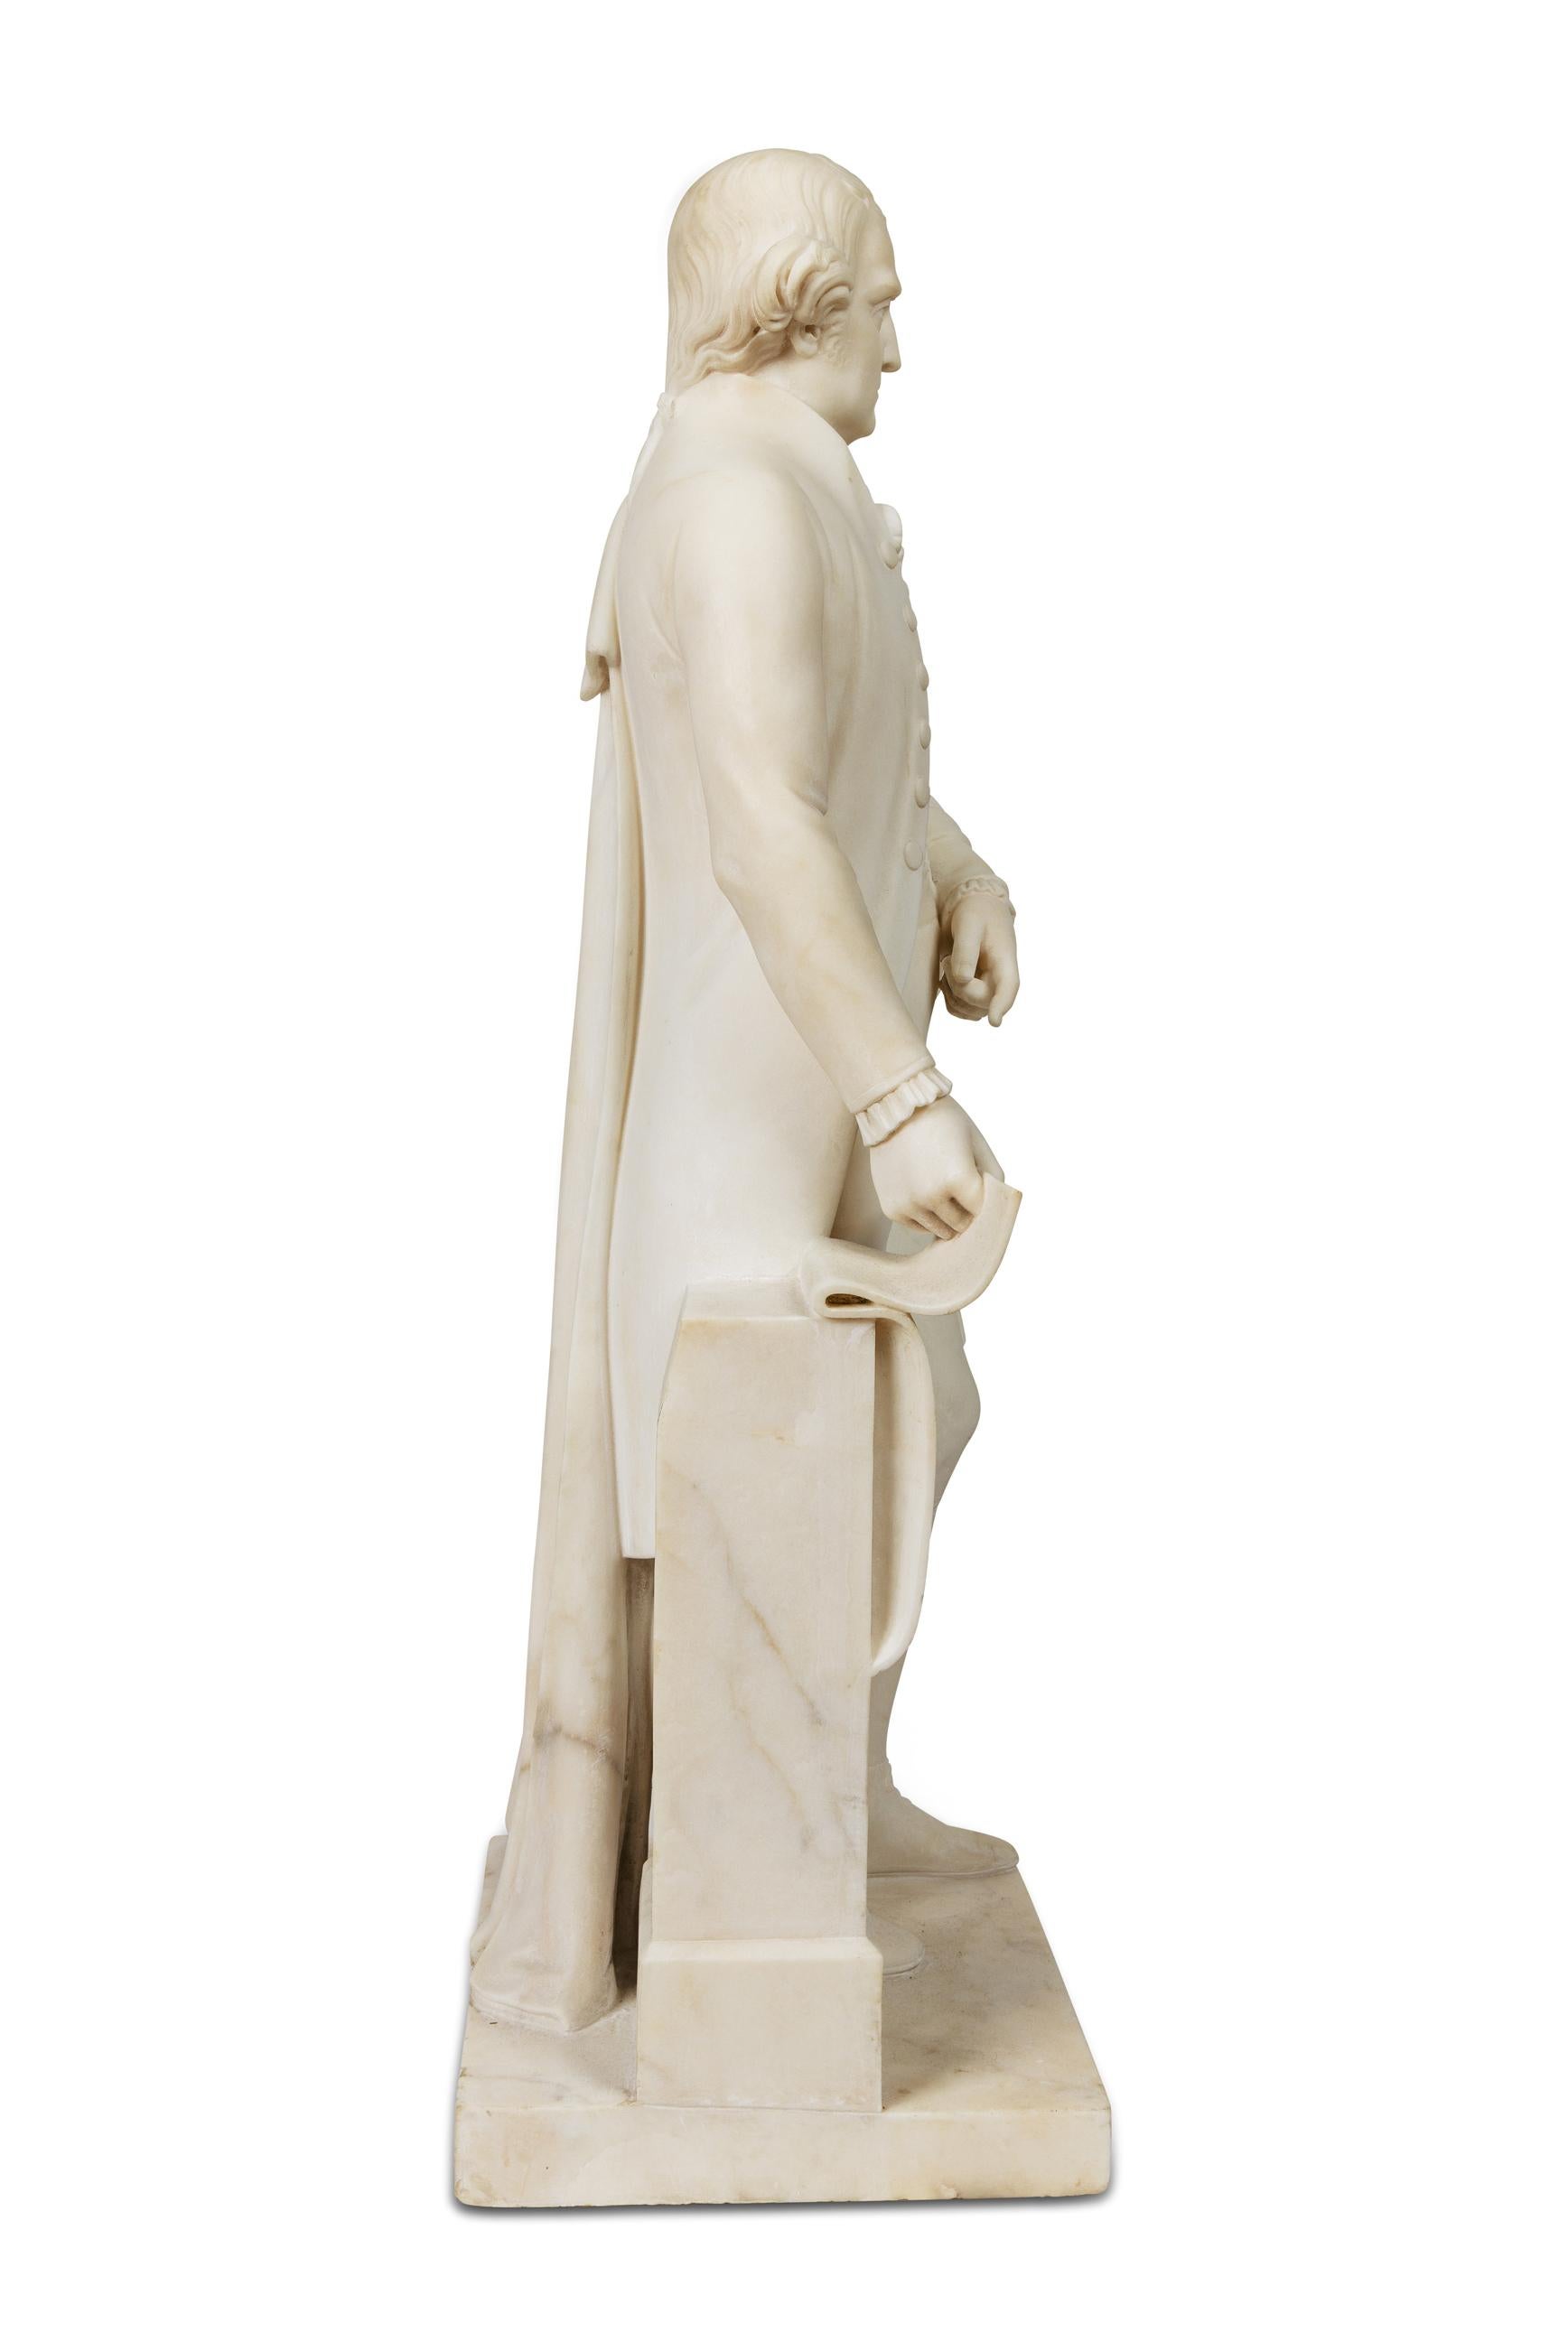 19th Century A Rare and Important American Marble Sculpture of Thomas Jefferson, Circa 1870 For Sale